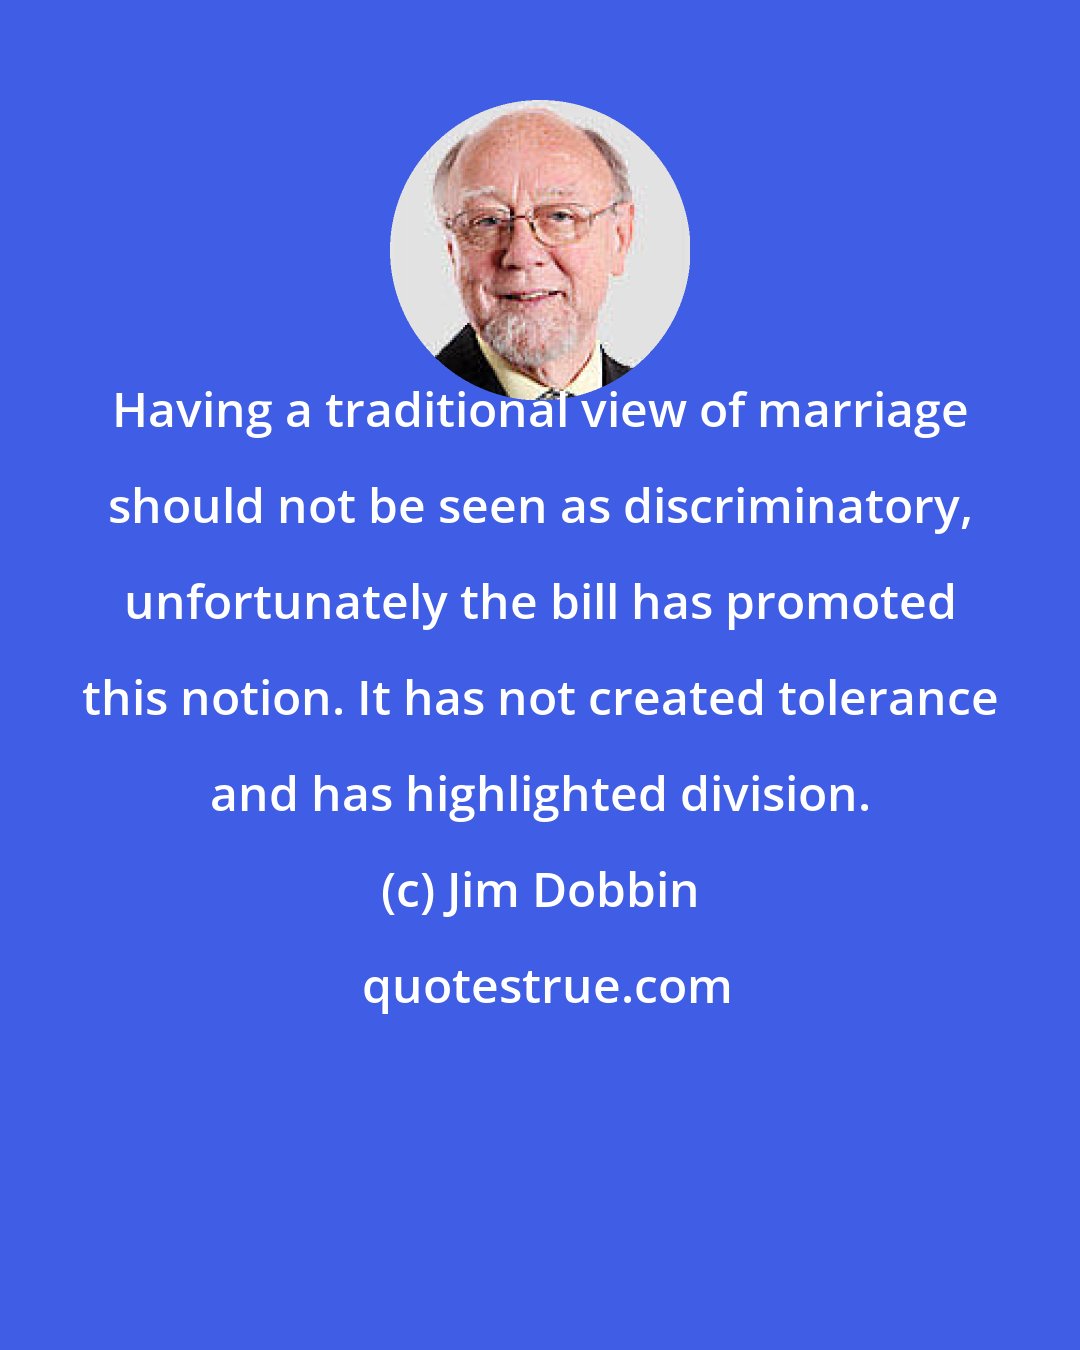 Jim Dobbin: Having a traditional view of marriage should not be seen as discriminatory, unfortunately the bill has promoted this notion. It has not created tolerance and has highlighted division.